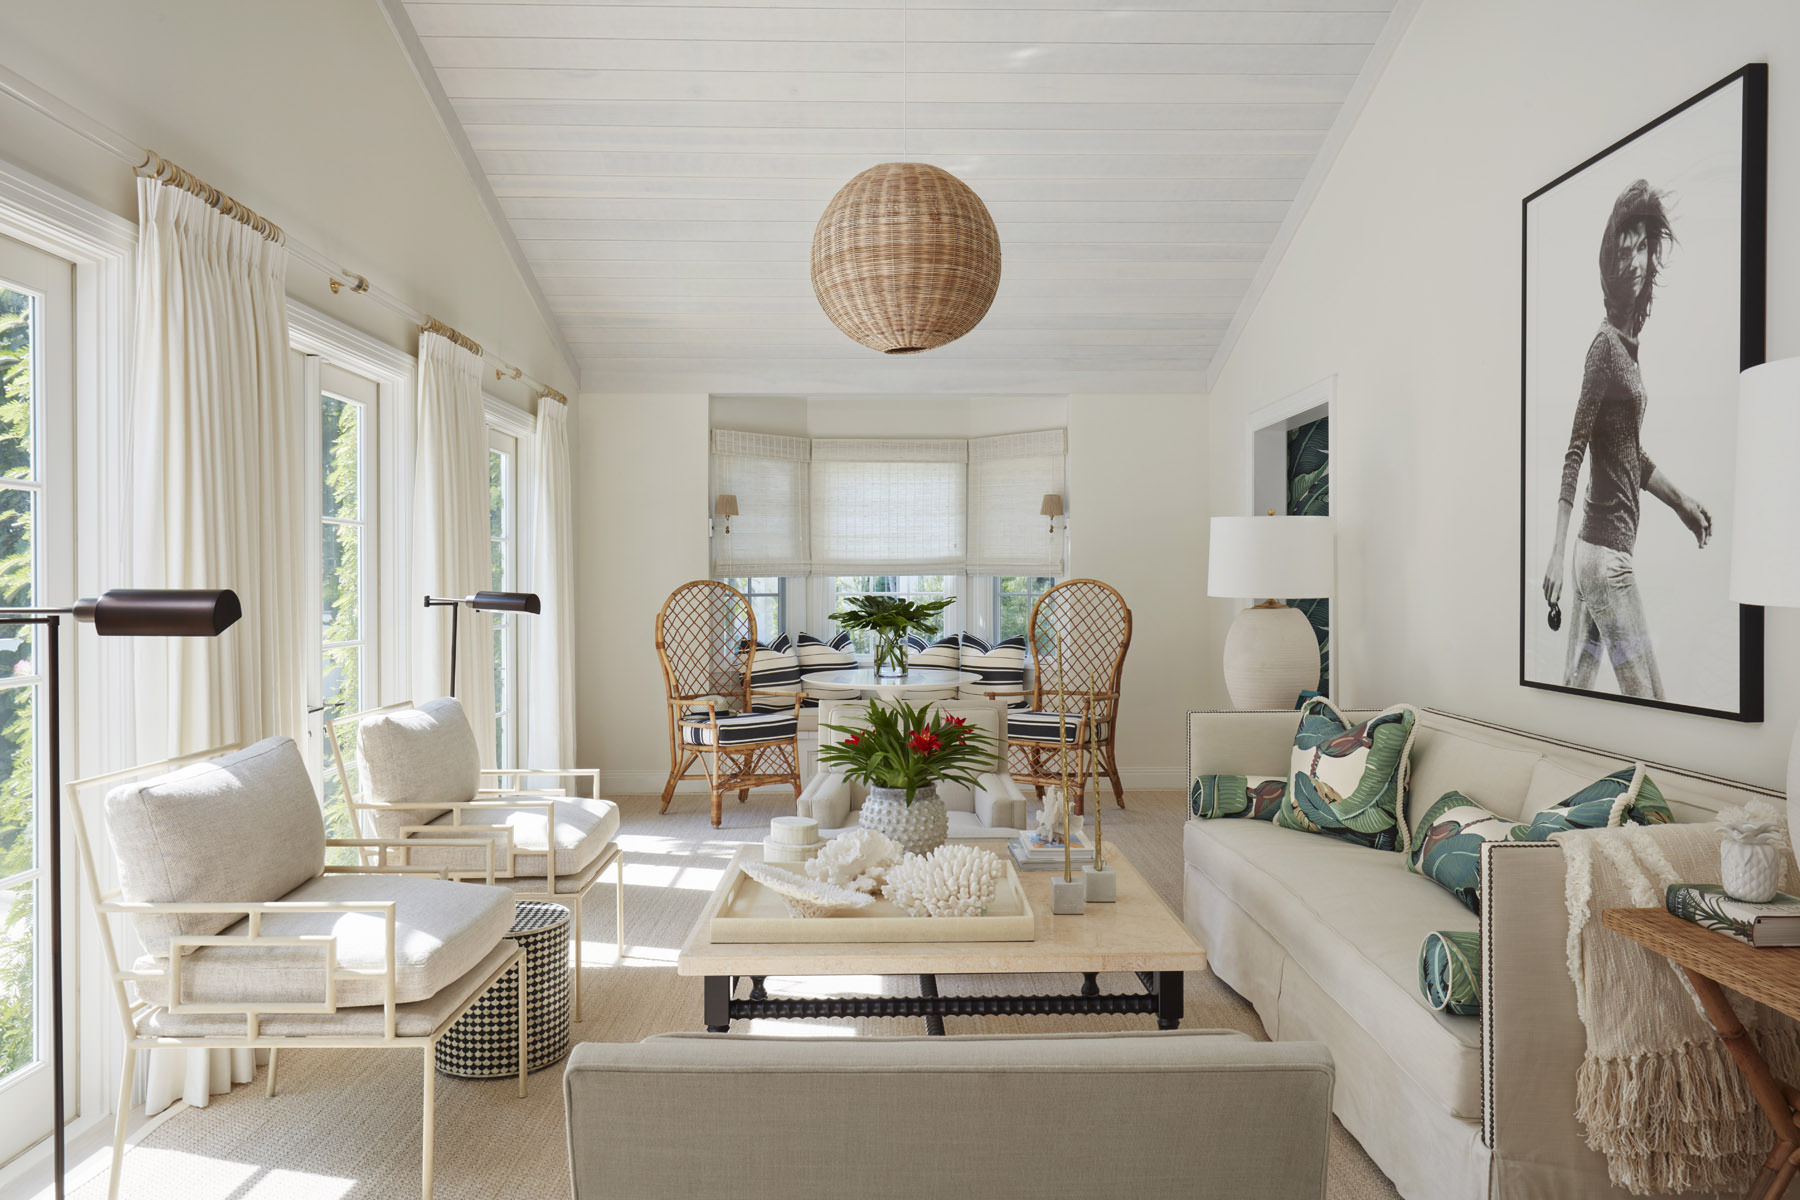 Tour the laid-back lush Palm Beach house that brilliantly blends minimalist neutrals with coastal flair--designed by Lindsey Lane